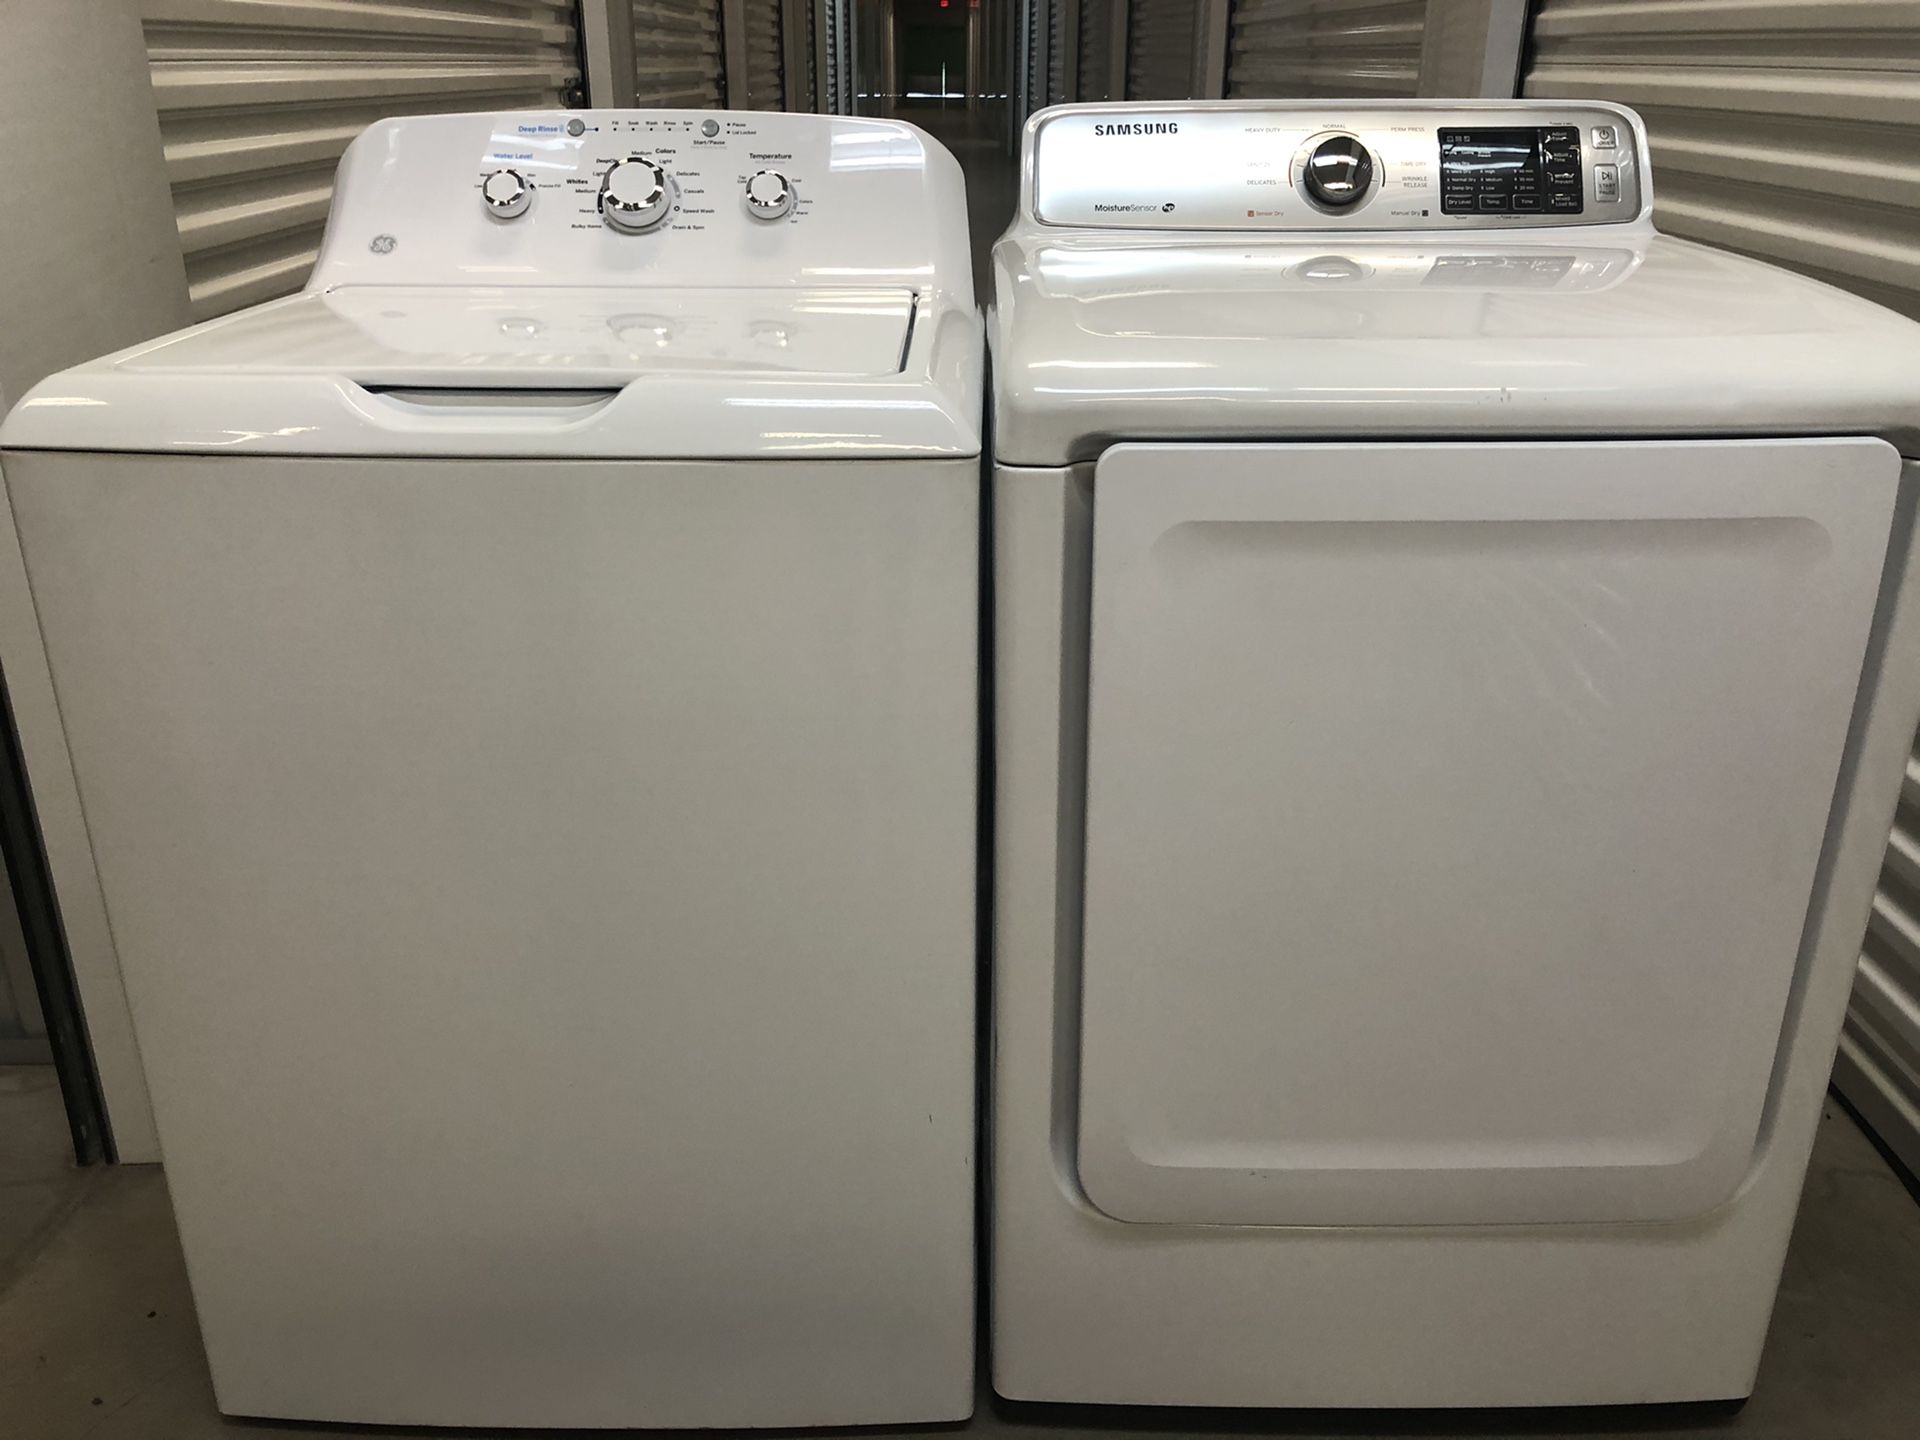 New Samsung dryer(scratch/dent) and almost new GE Washer